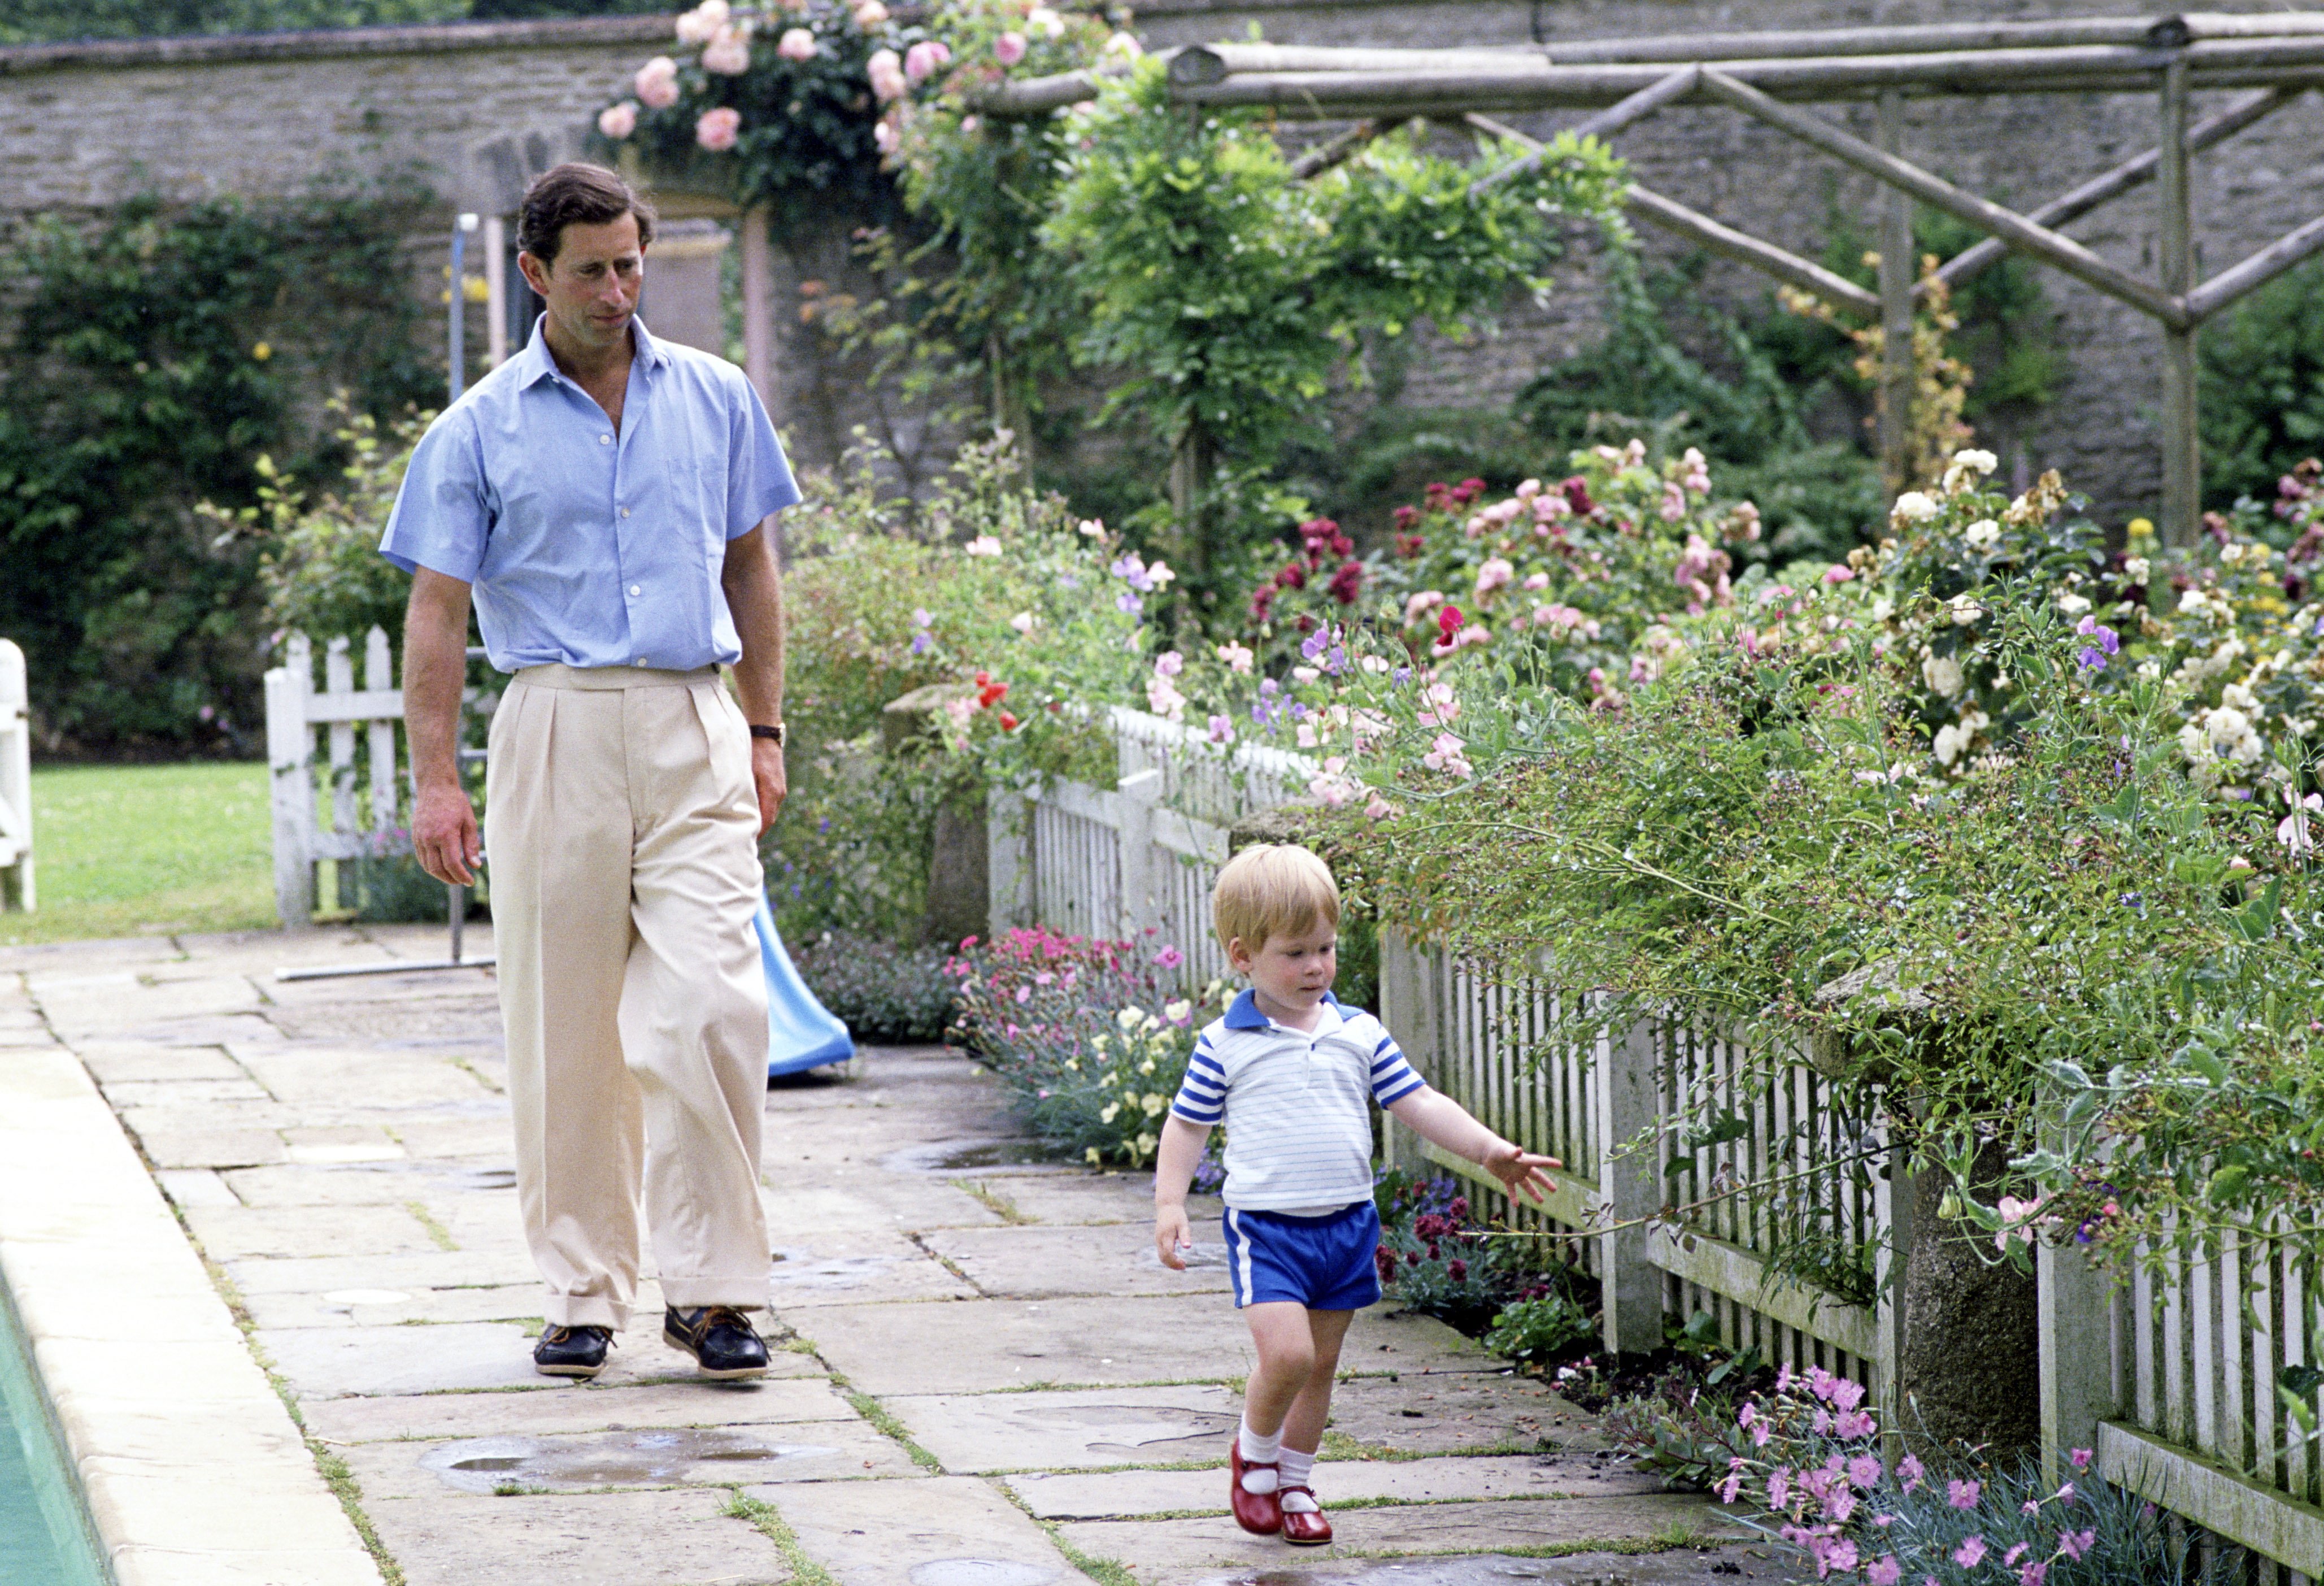 King Charles And Prince Harry By The Swimming Pool In The Garden At Their Home Highgrove House, Circa 1986 | Source: Getty Images